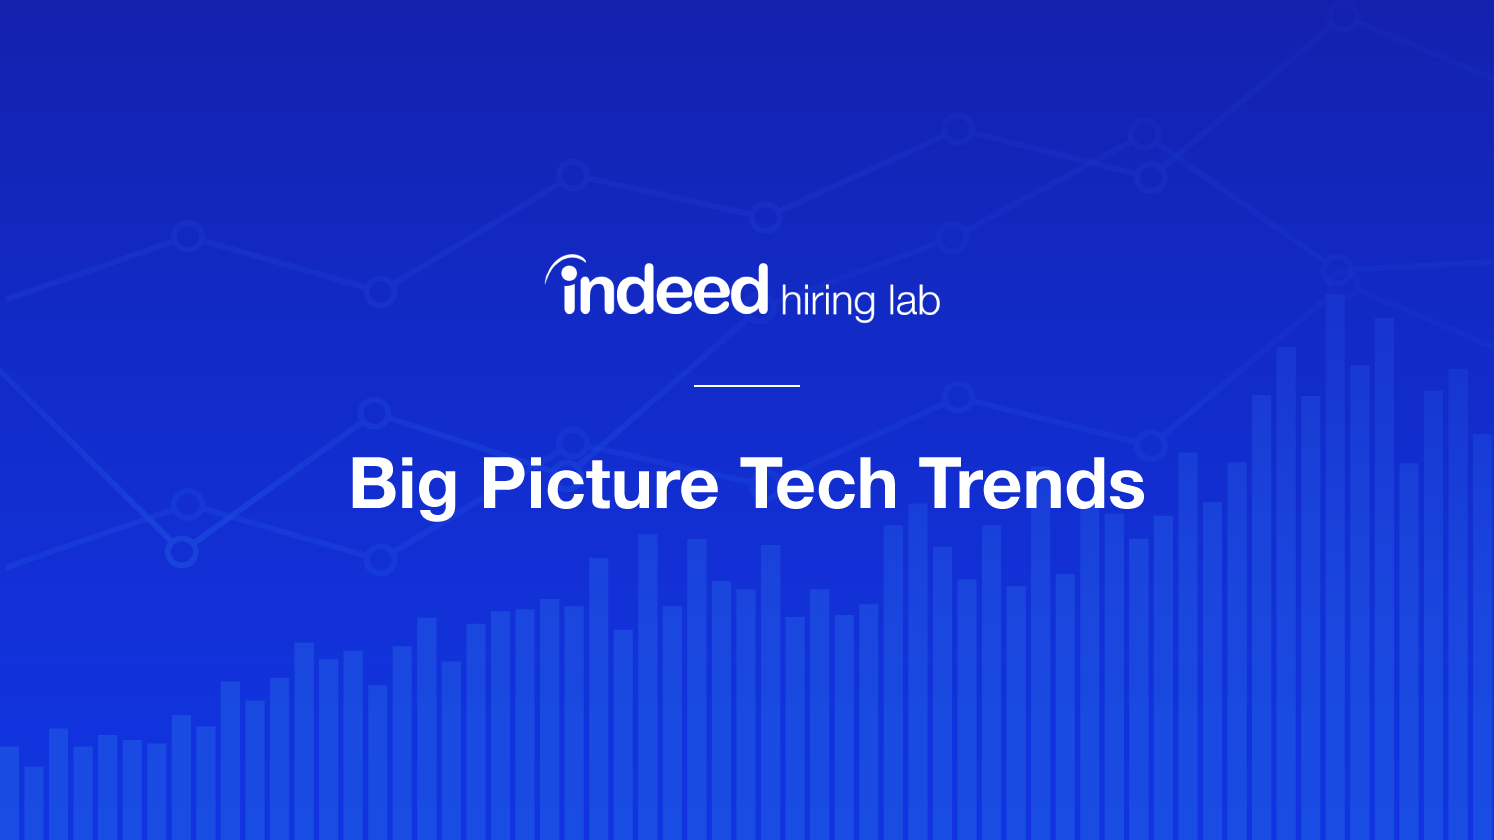 Big Picture Tech Trends